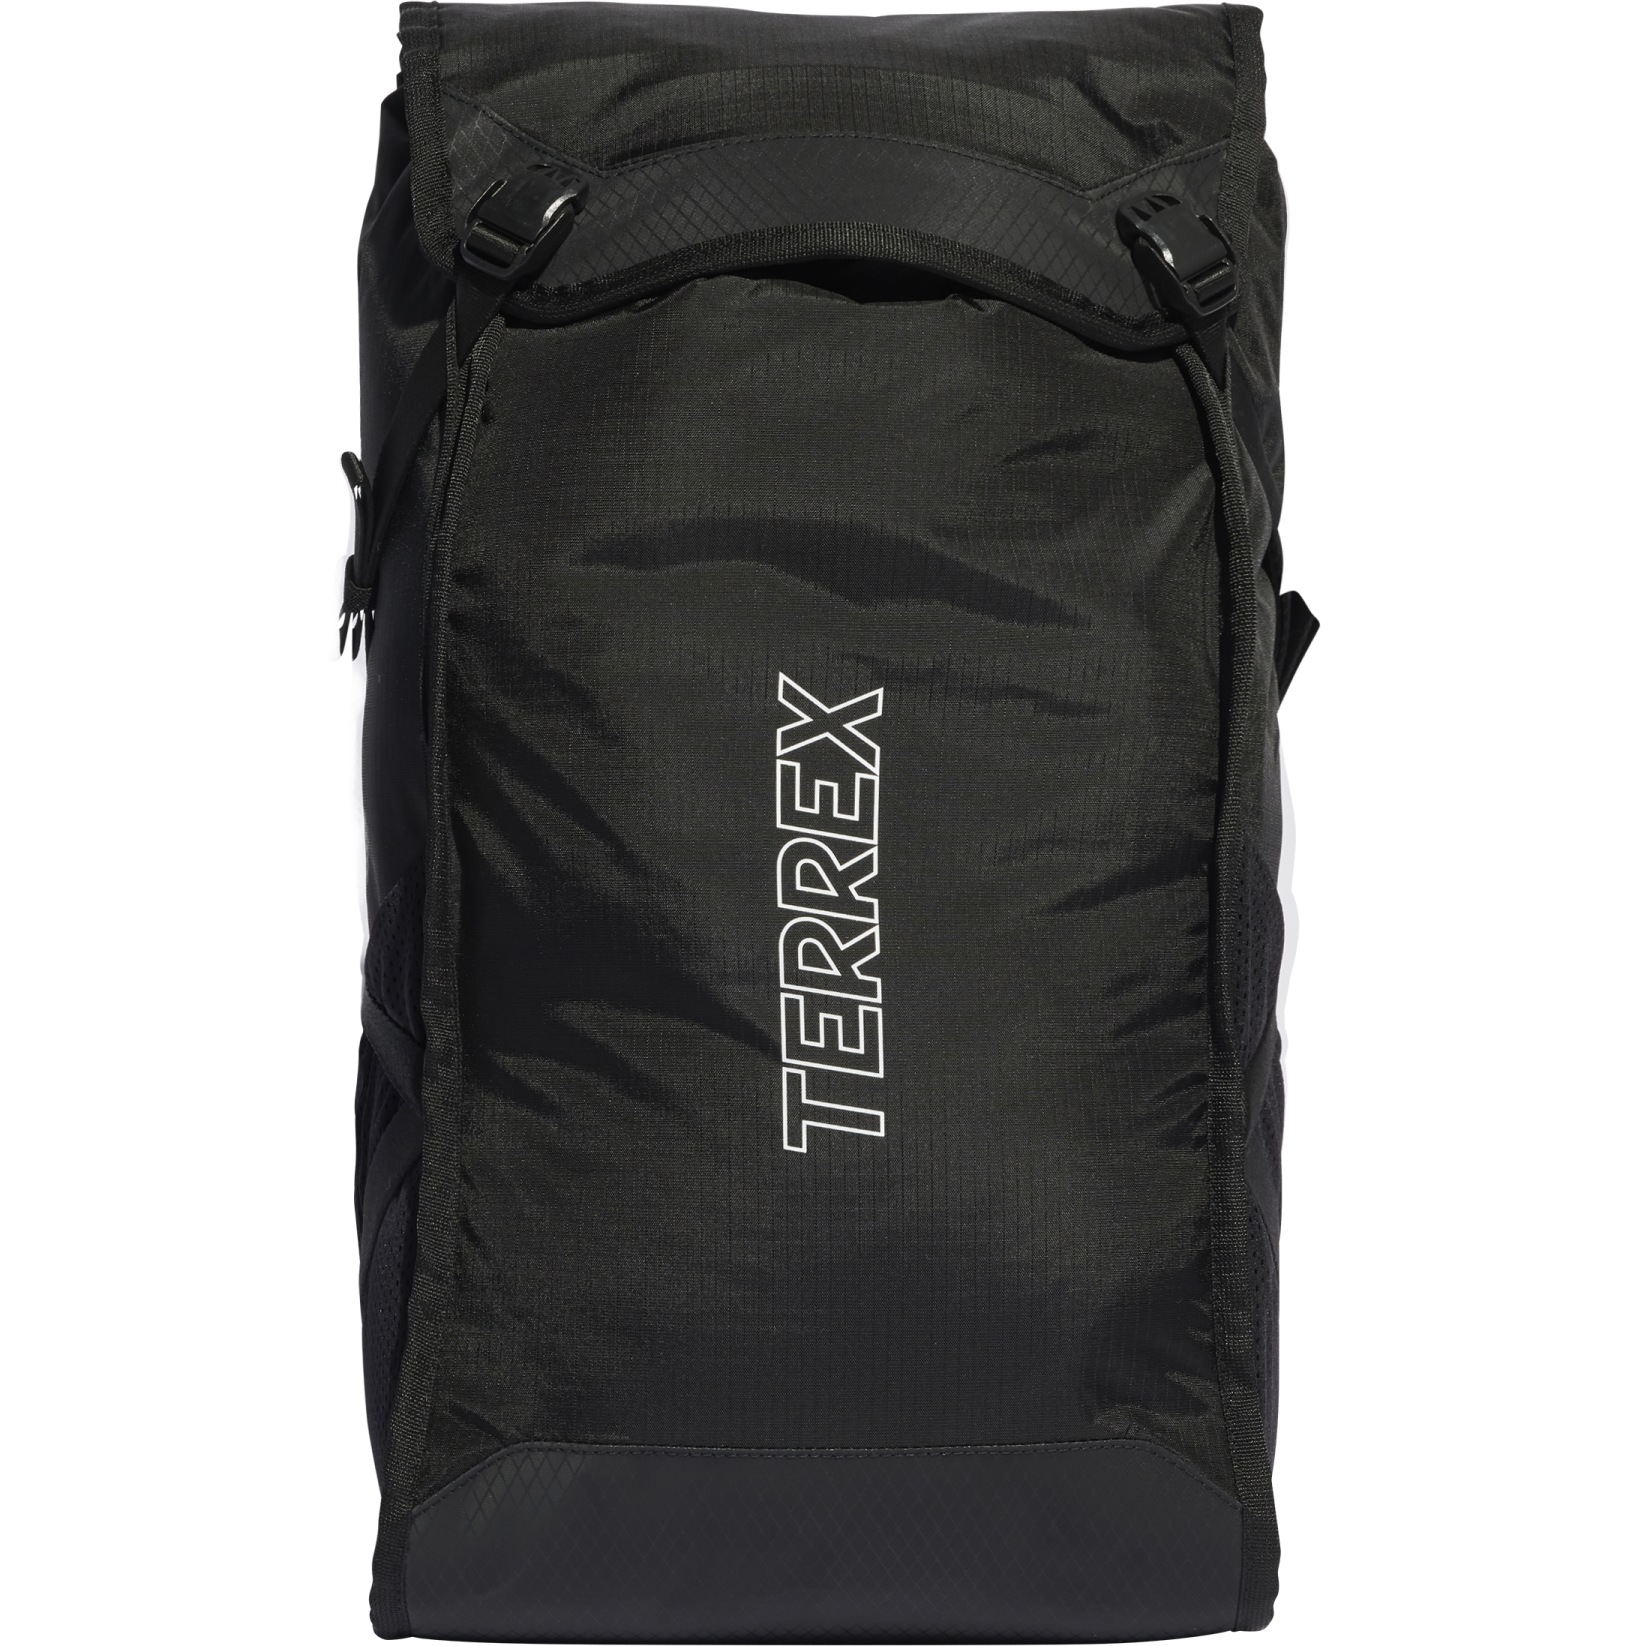 Picture of adidas TERREX Aeroready Multi-Sport Backpack - black/onix IN4640